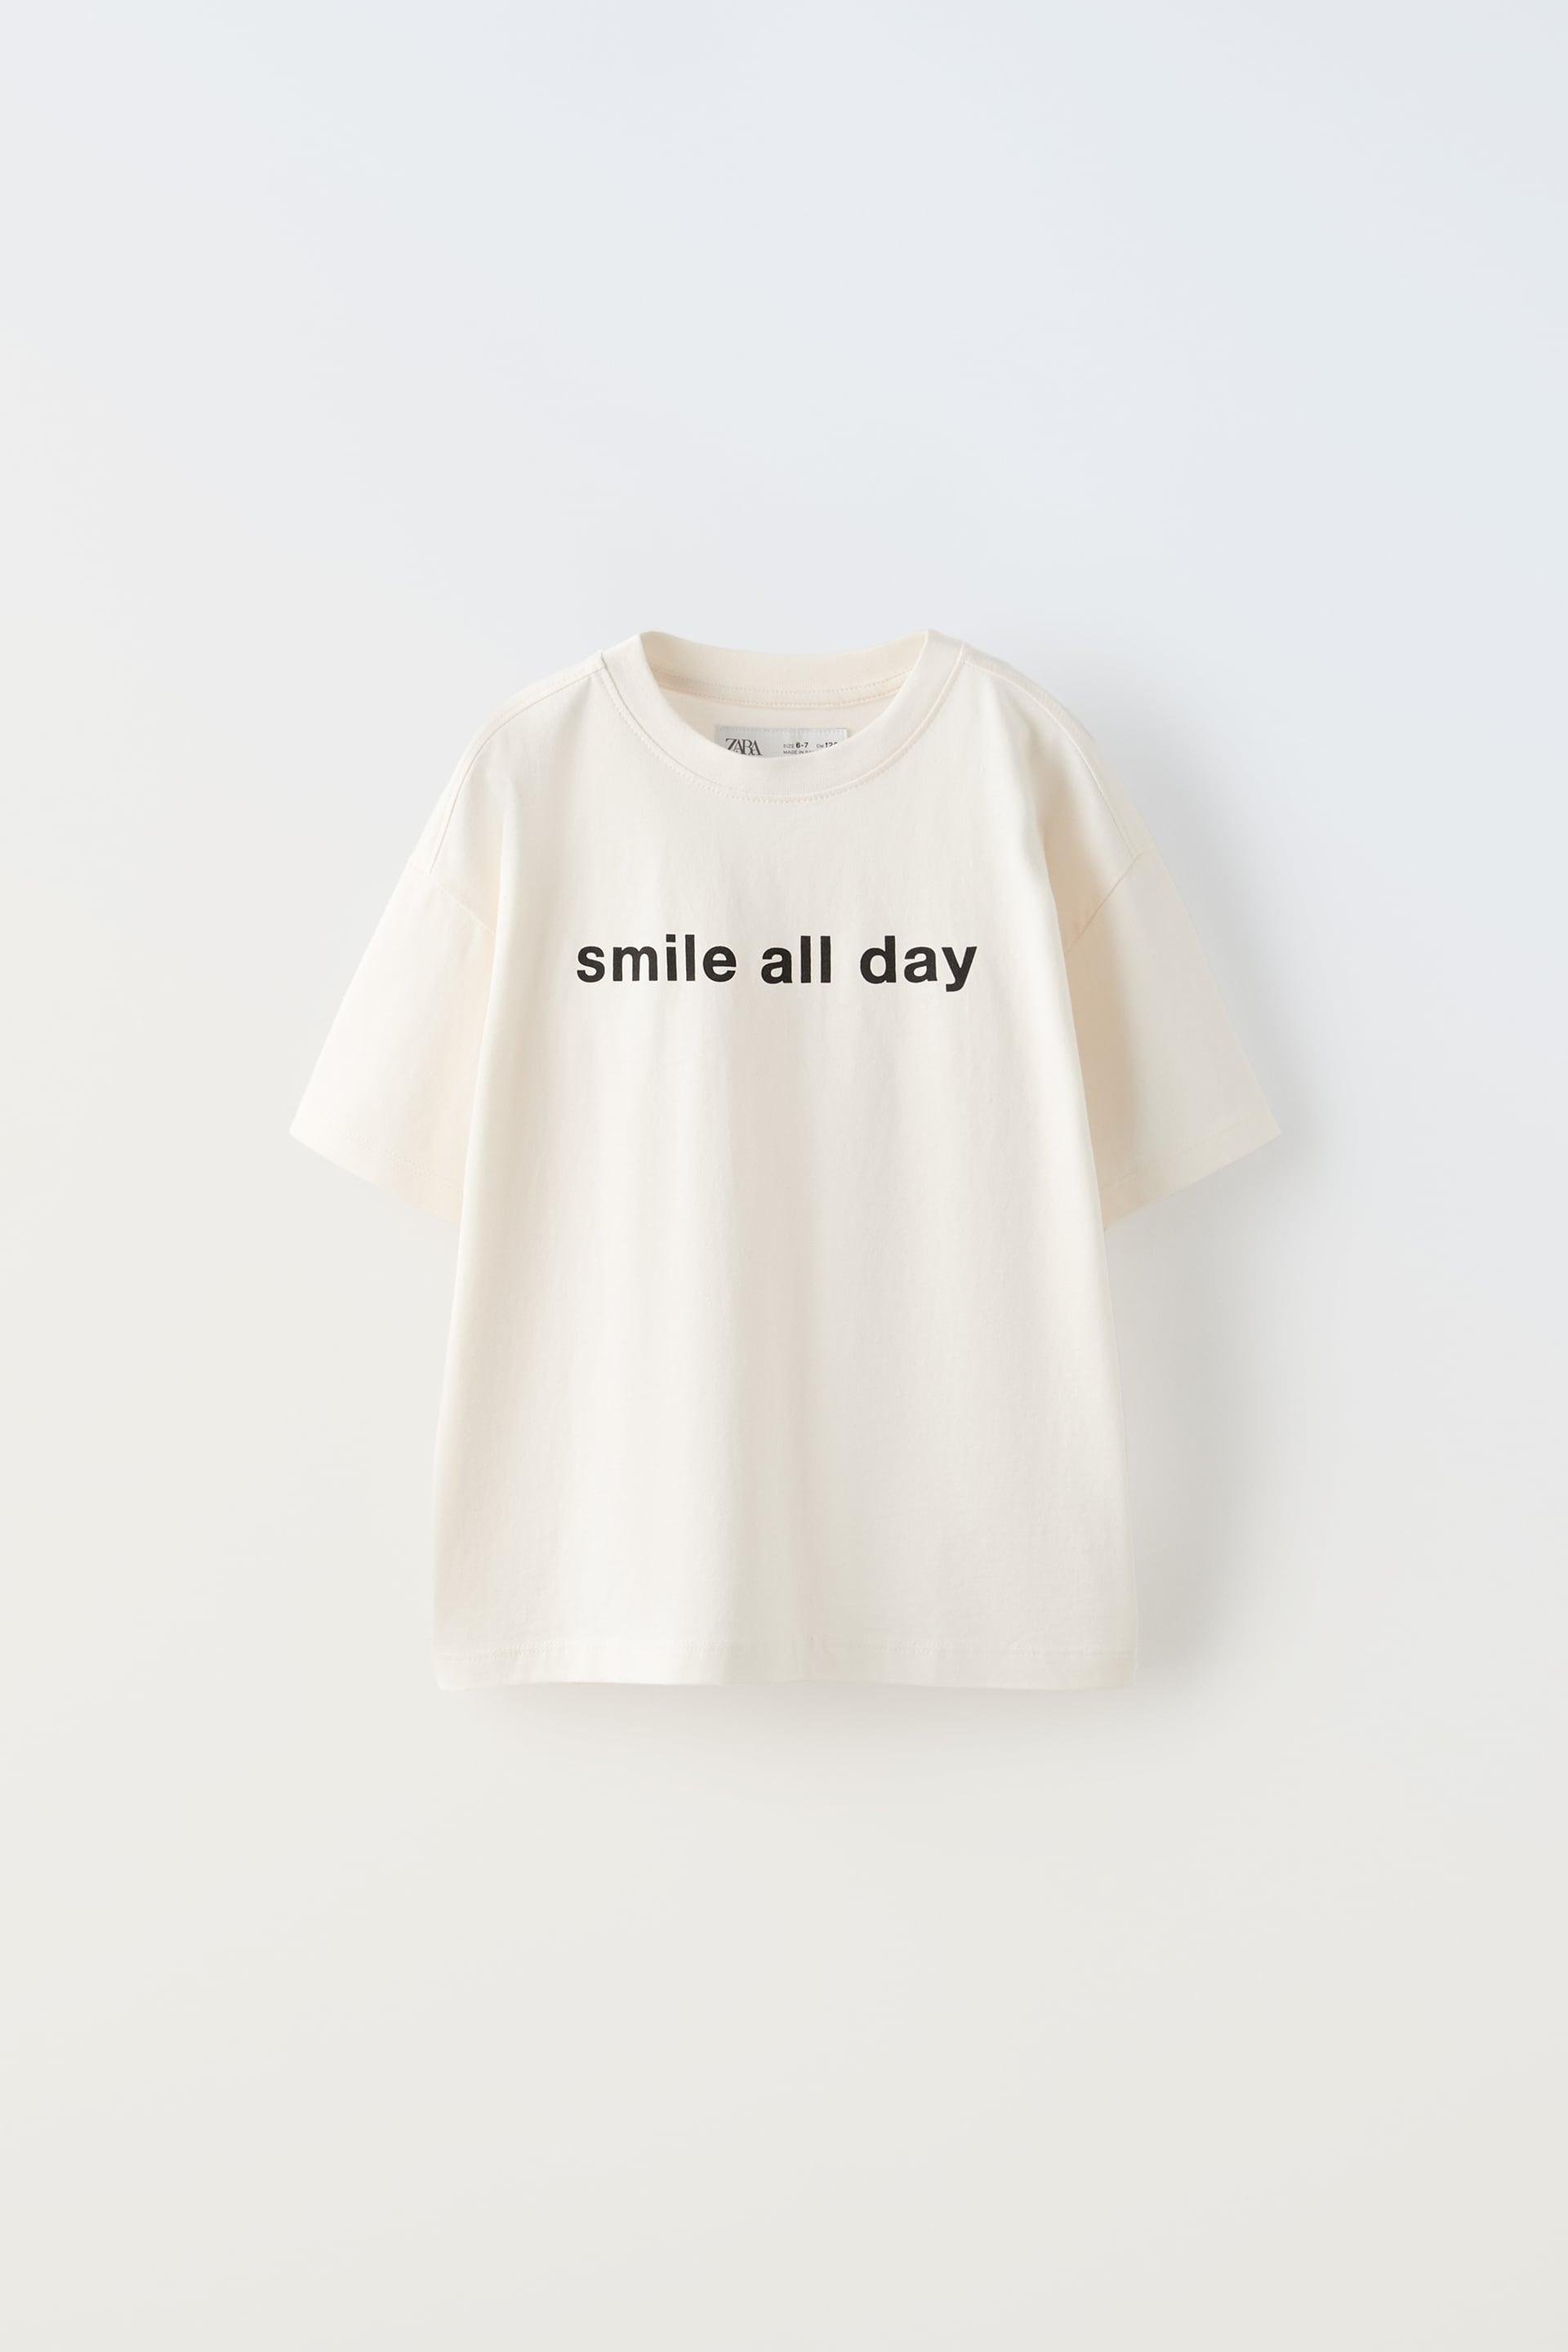 “SMILE ALL DAY” T-SHIRT by ZARA